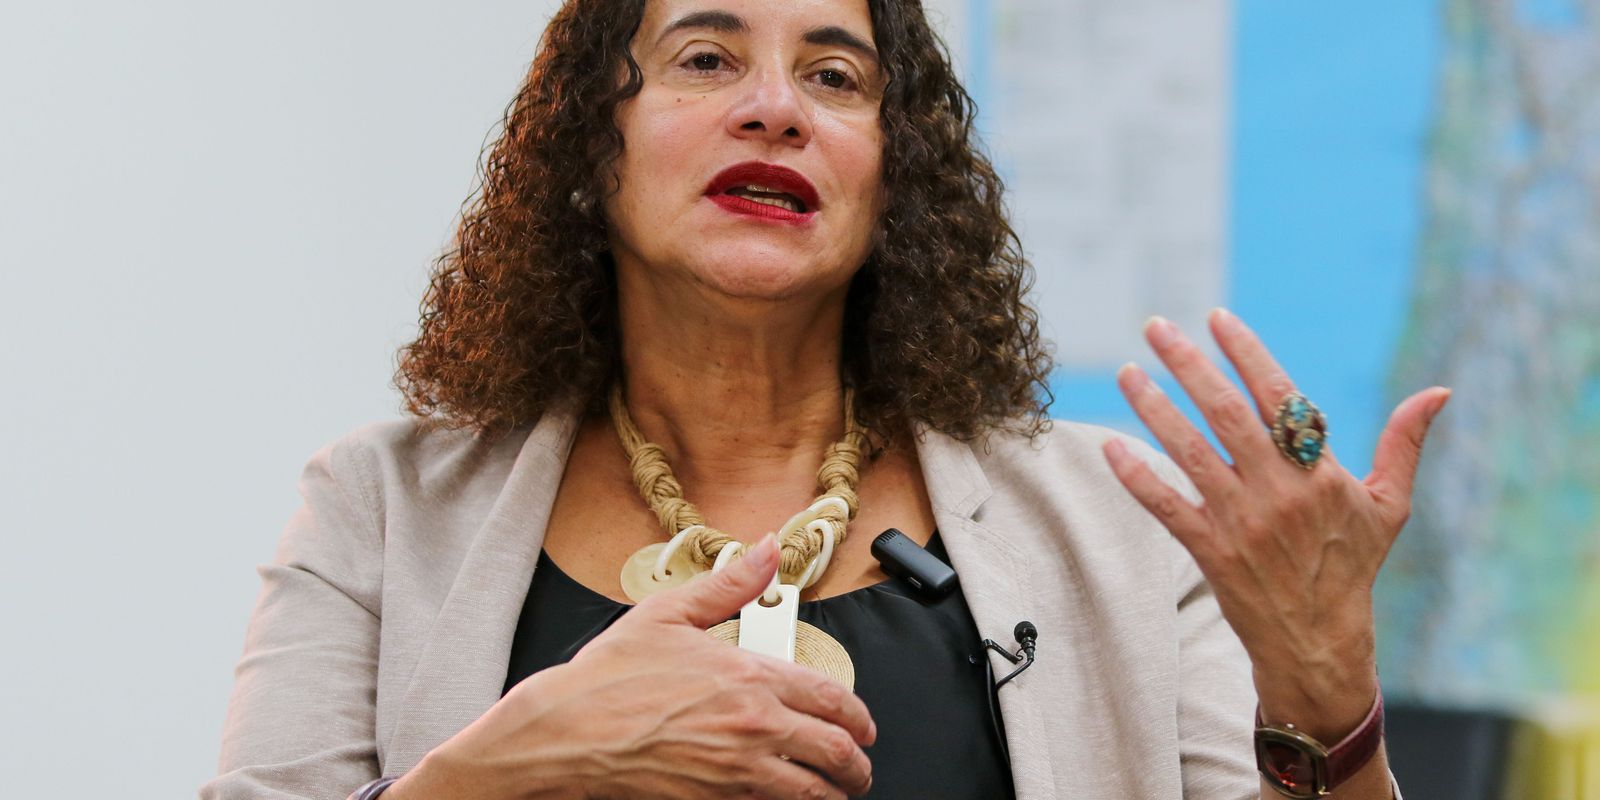 Science can be used to fight hunger, says Minister Luciana Santos